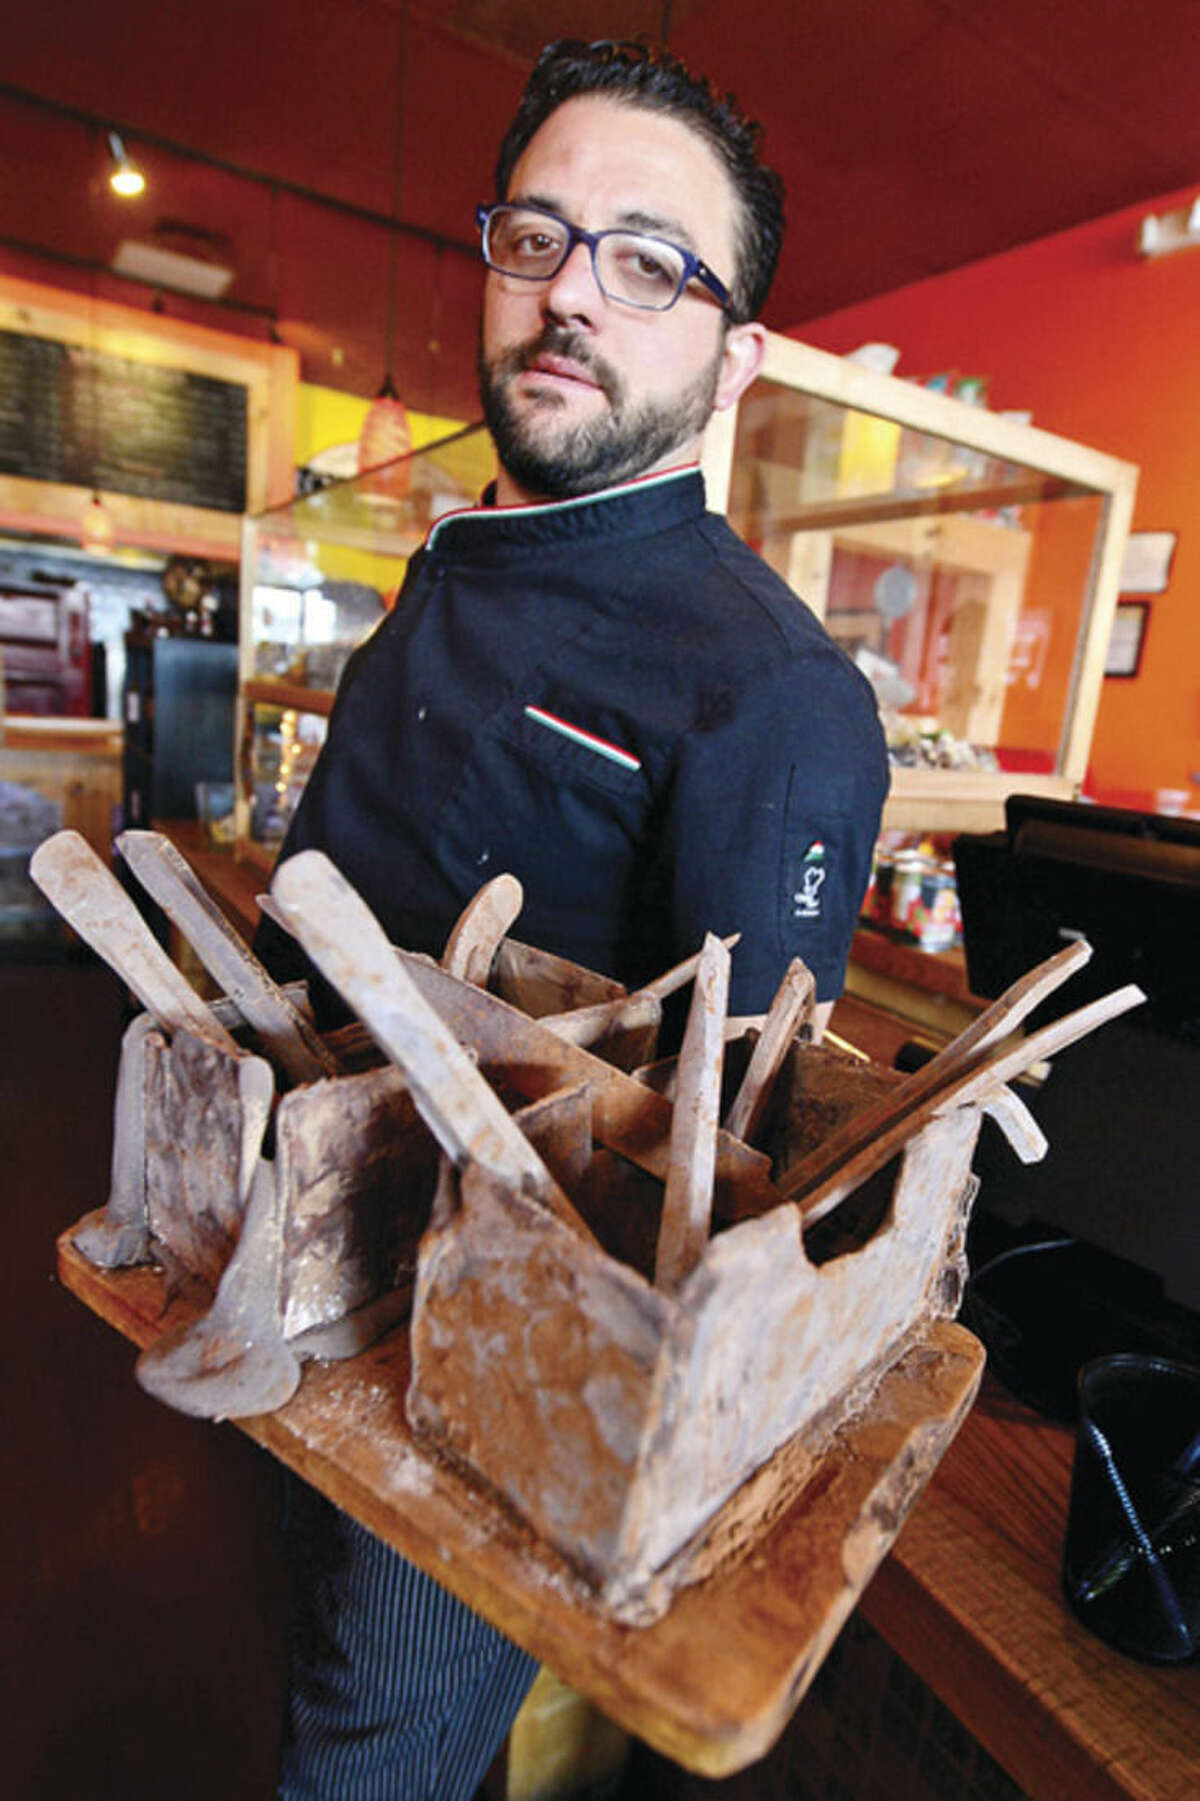 Hour photo / Erik Trautmann Romanacci's pizza restaurant owner, Graziano Ricci, makes hand-crafted chocolate tools, including hammers, wrenches, and bolts, that are a favorite among his customers.